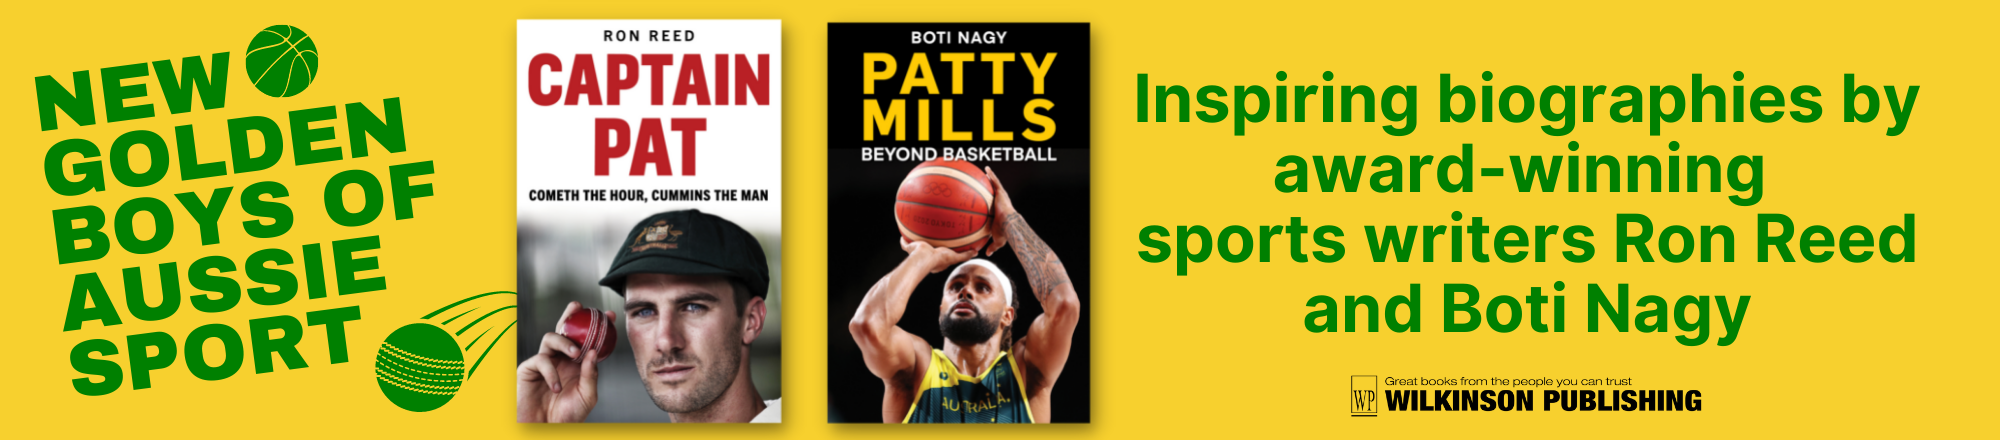 Wilkinson Publishing lower banner_Captain Pat and Patty Mills